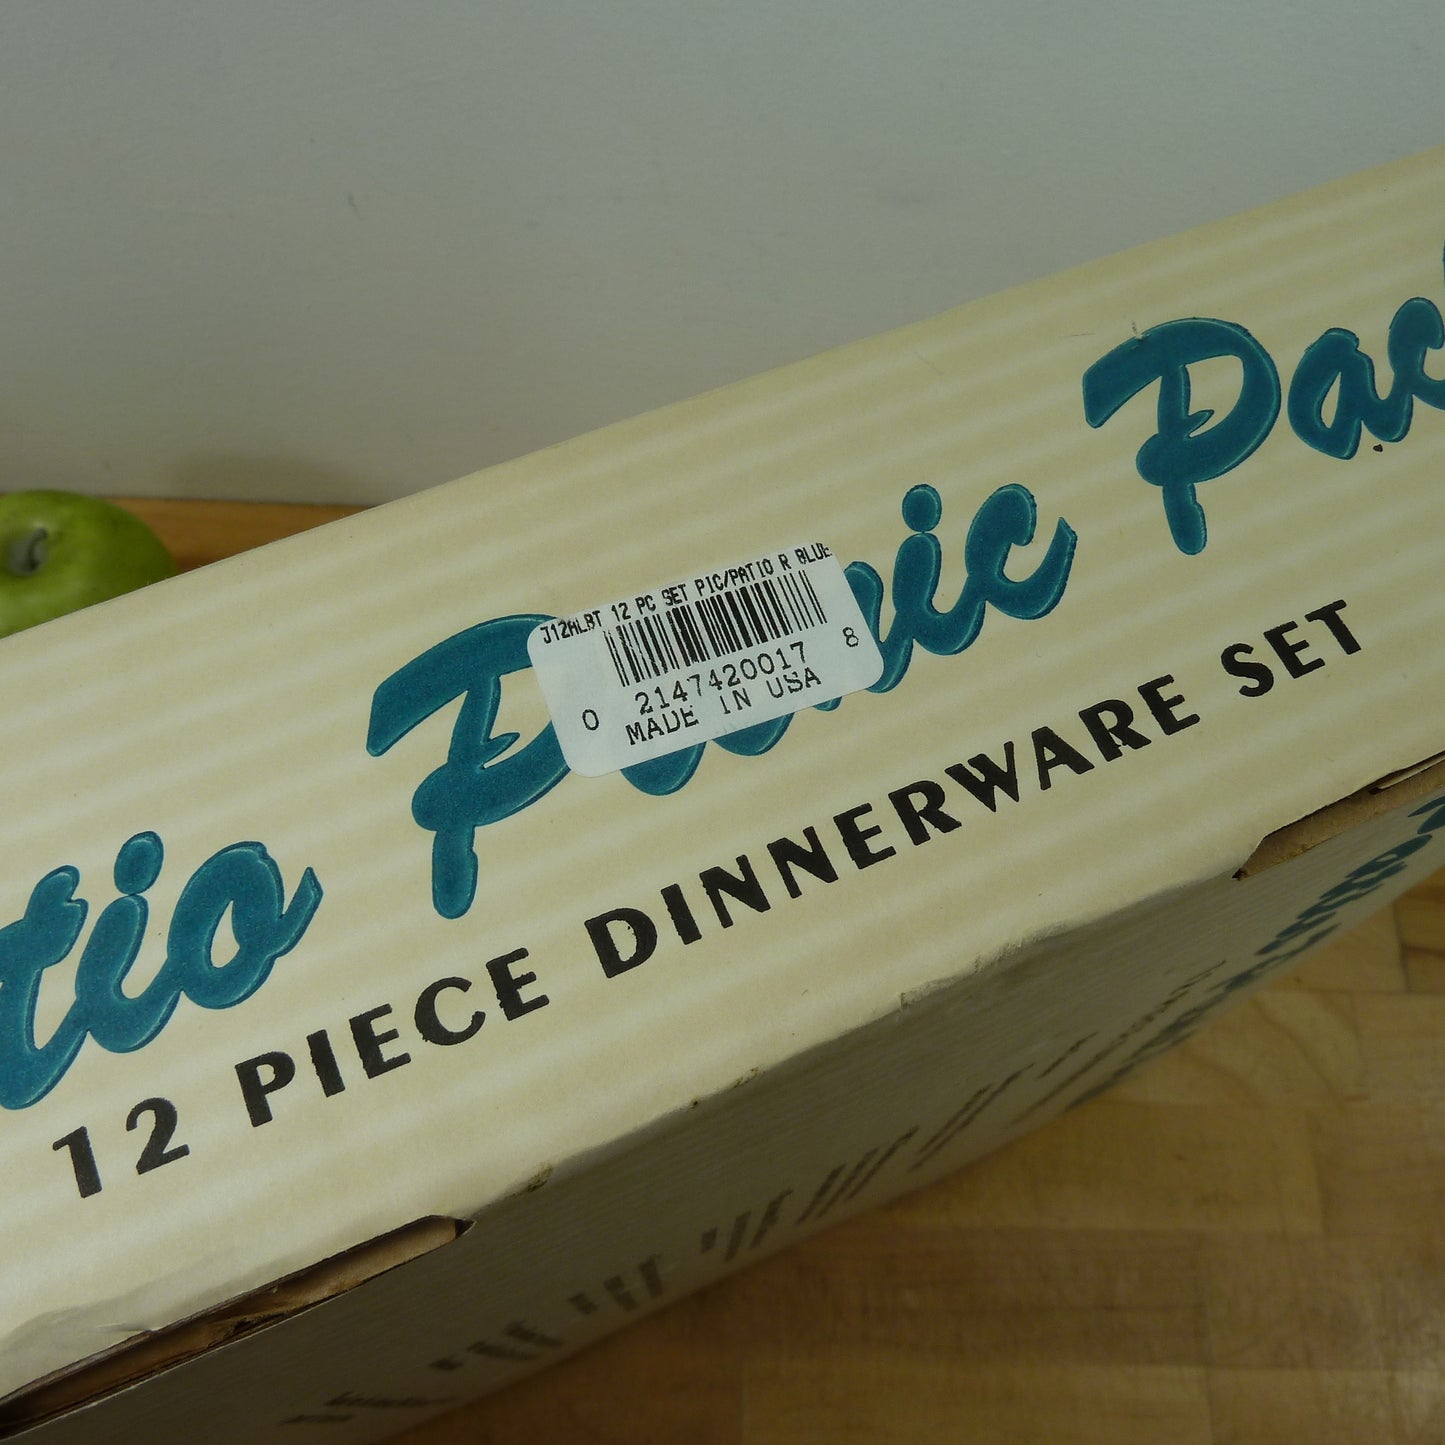 Texas Ware PMC Patio Picnic Pack NOS Boxed 12 Piece Set Dinnerware Bar Code